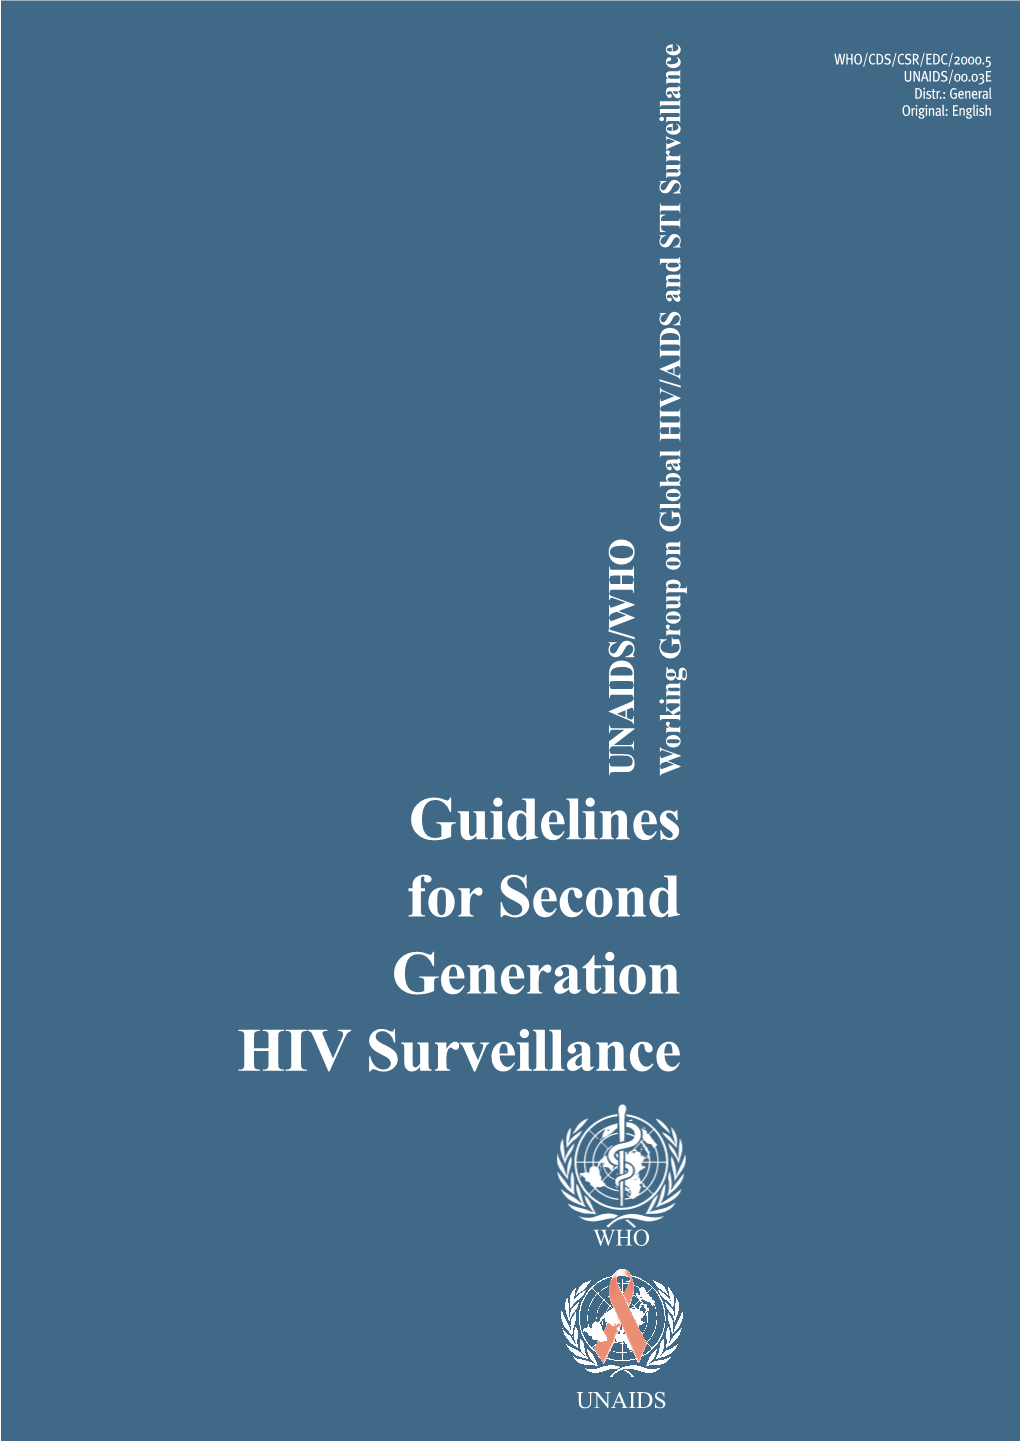 Guidelines for Second Generation HIV Surveillance